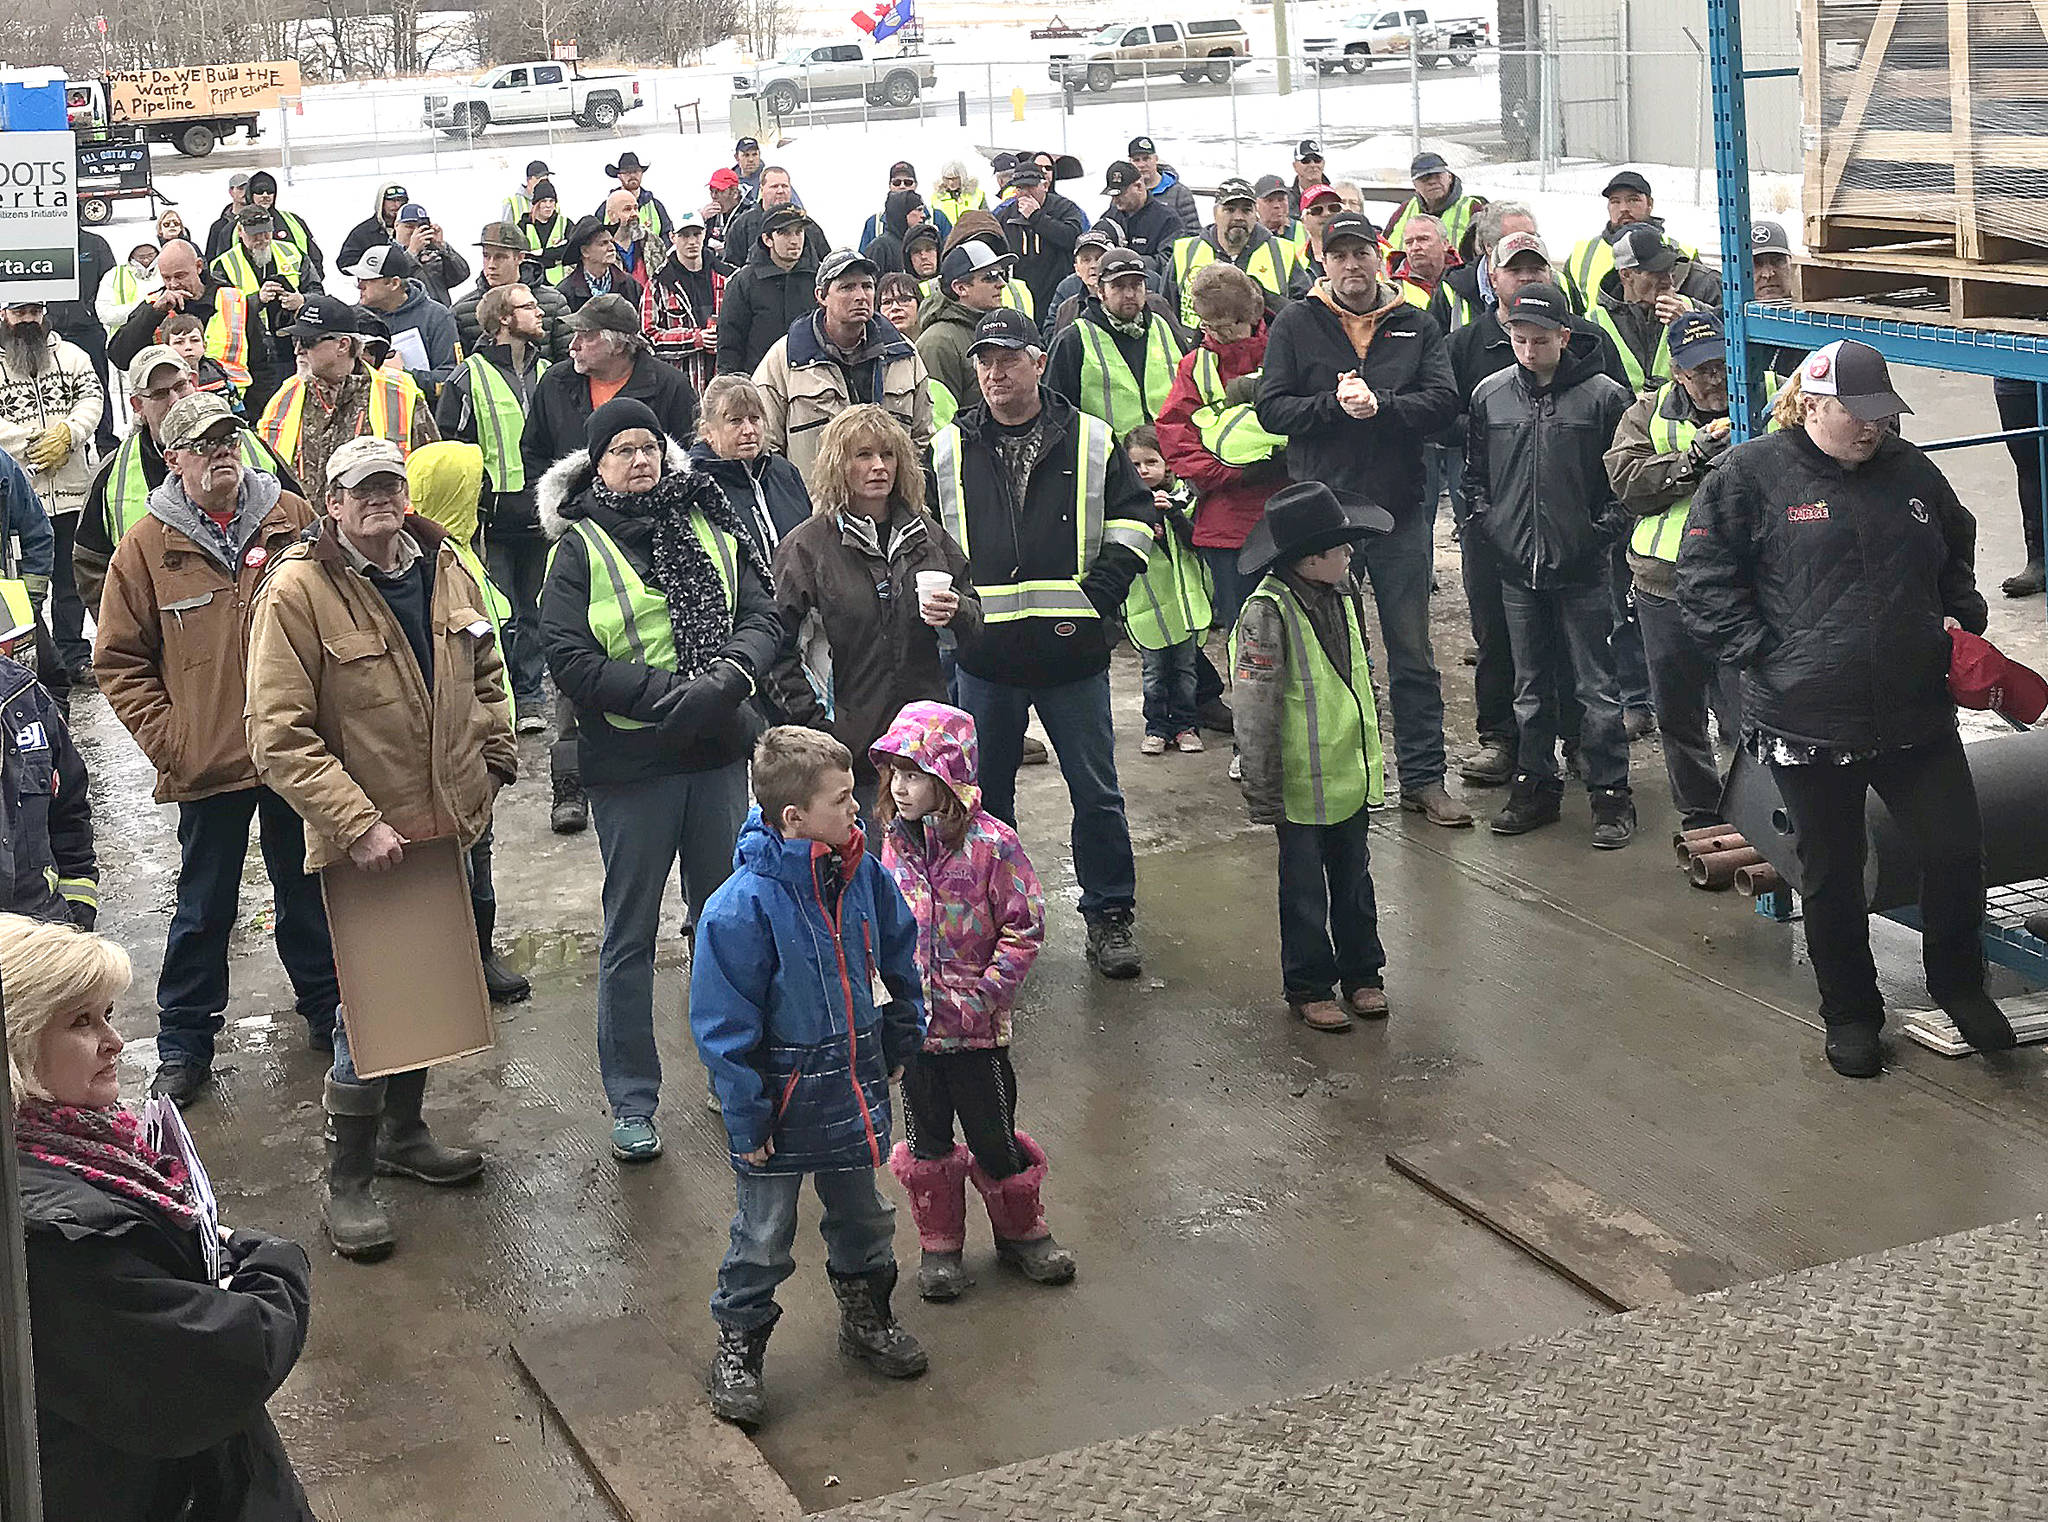 About 250 people attended the Heartland Rally in Stettler to show support for the oil and gas industry Jan. 26. (Lisa Joy/Stettler Independent)